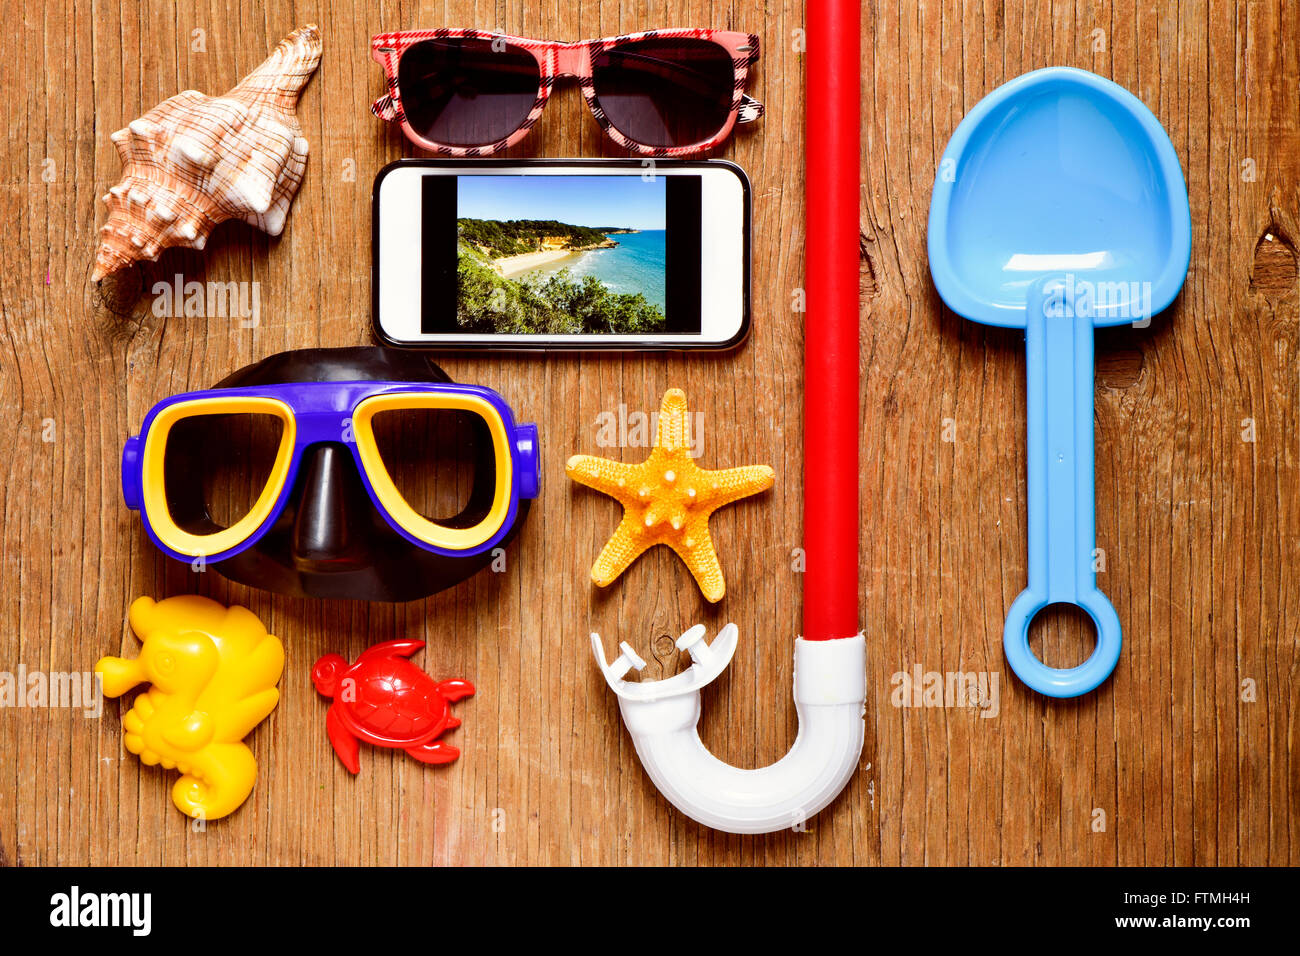 a rustic wooden table full of summer stuff, such a pair of sunglasses, a starfish, a conch, a diving mask or a snorkel, and a sm Stock Photo